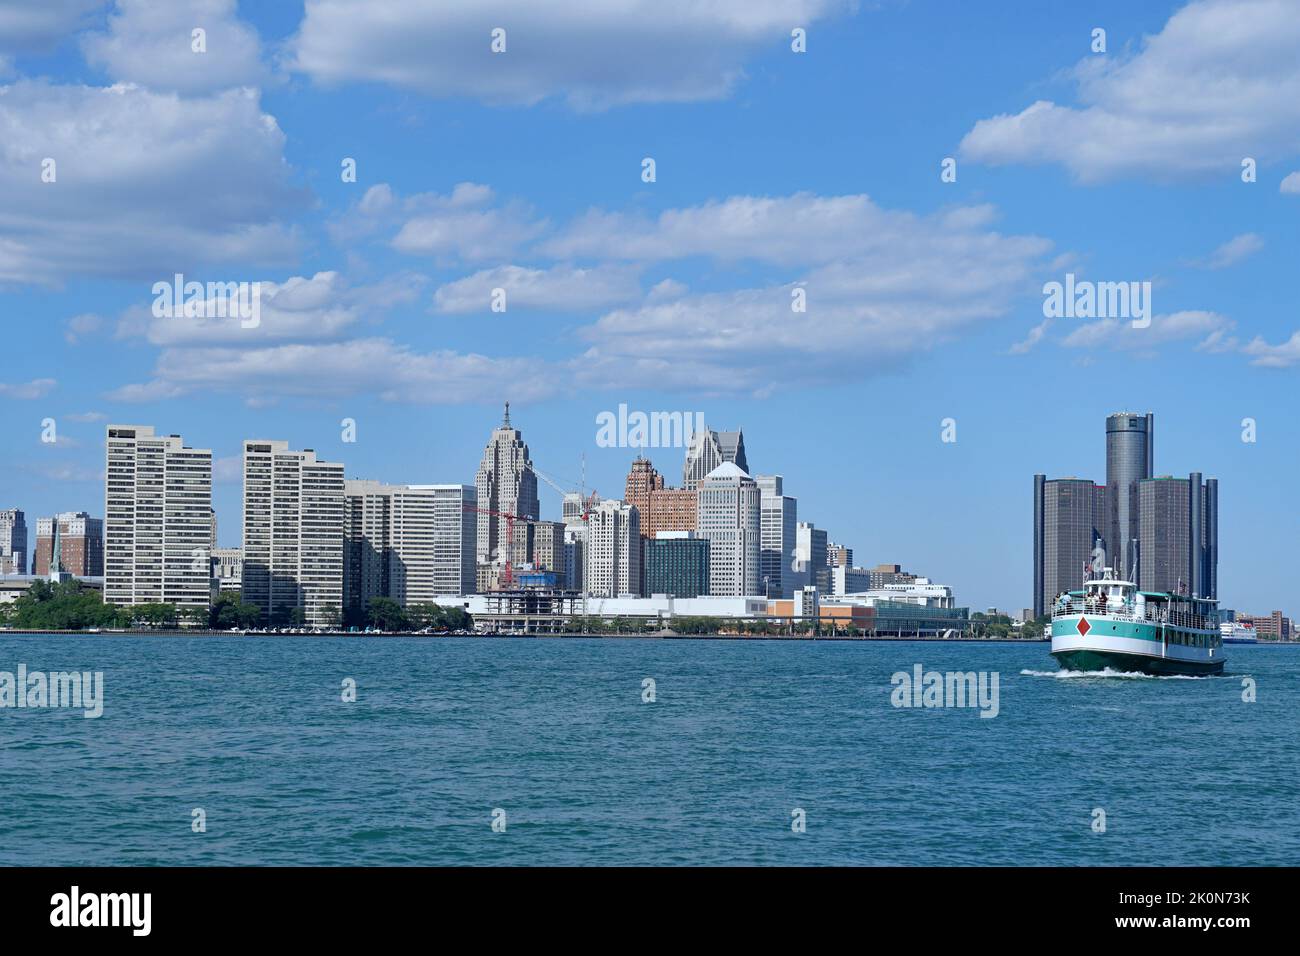 Detroit downtown skyline and waterfront viewed from across the river Stock Photo